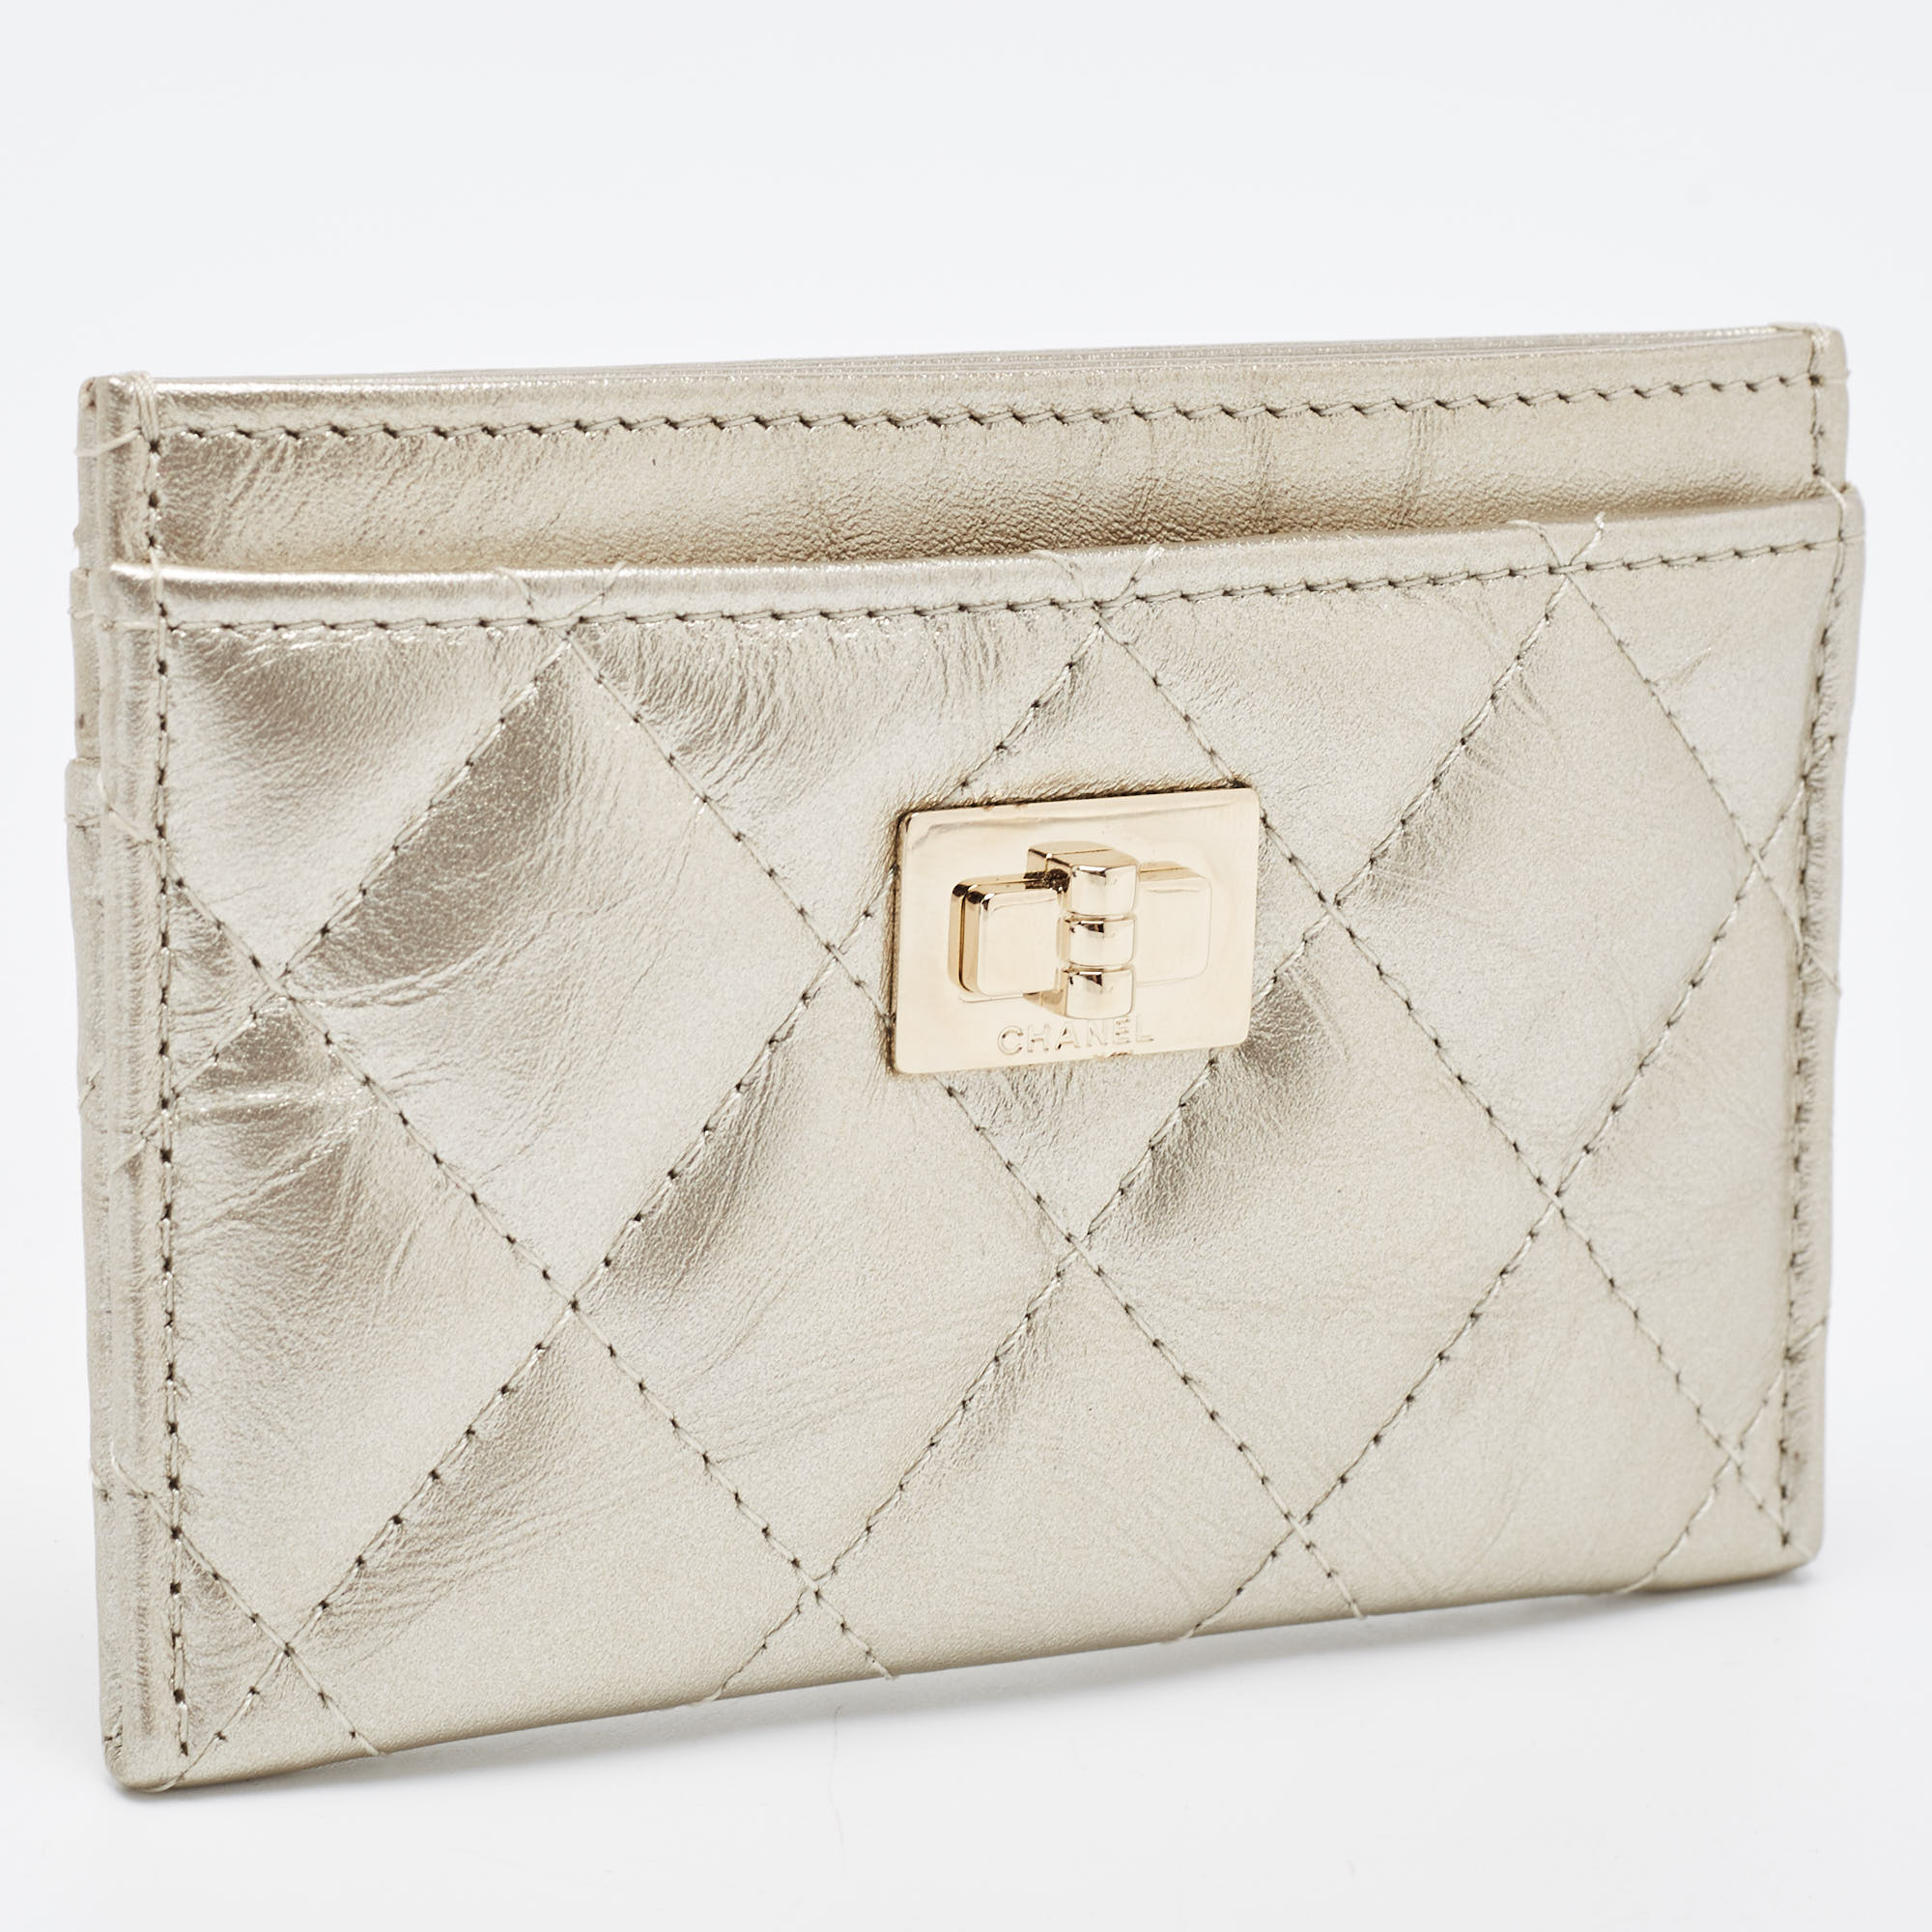 Chanel Gold Quilted Leather Reissue Card Holder